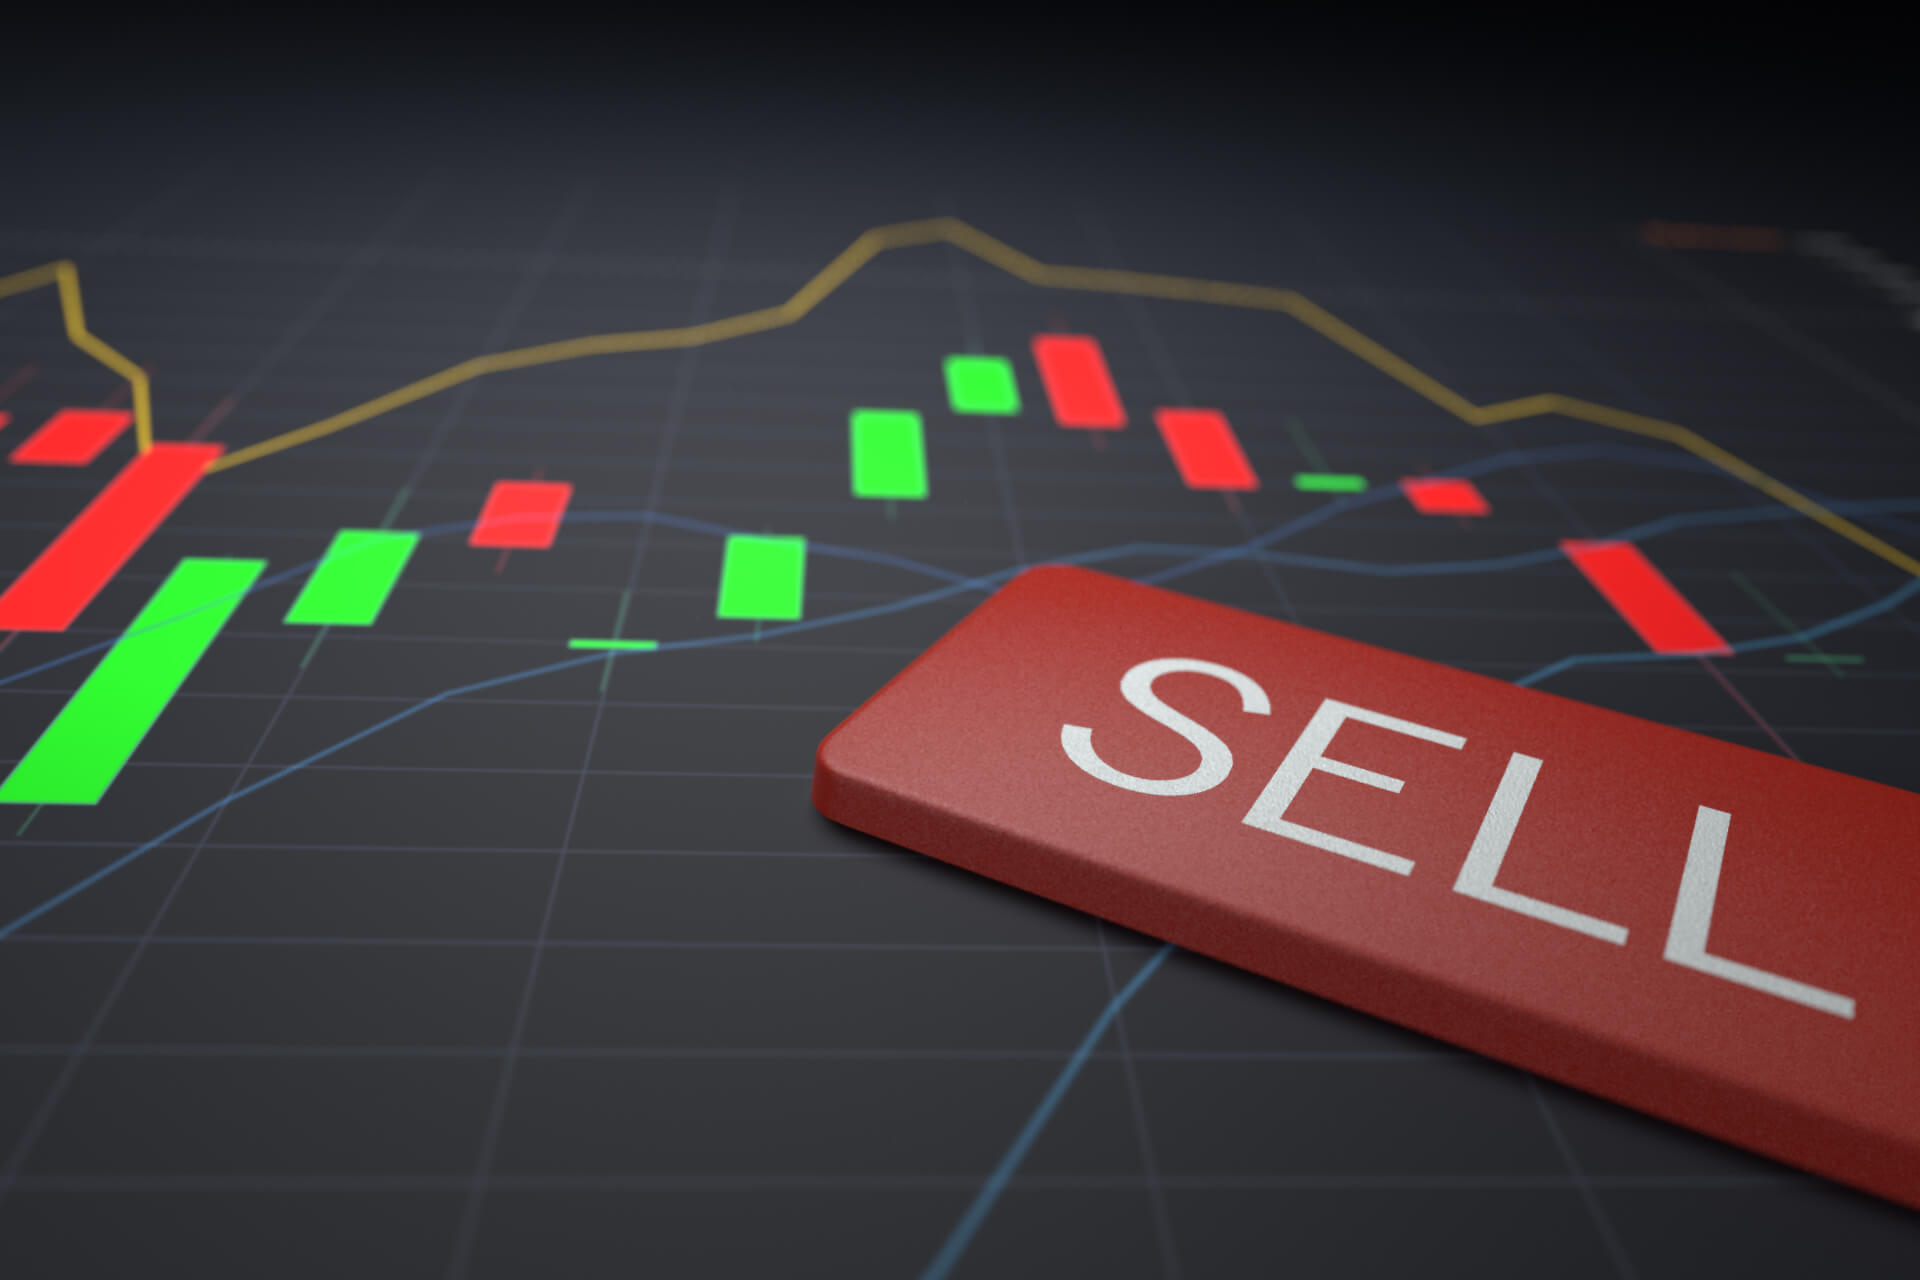 Sell stocks free image download